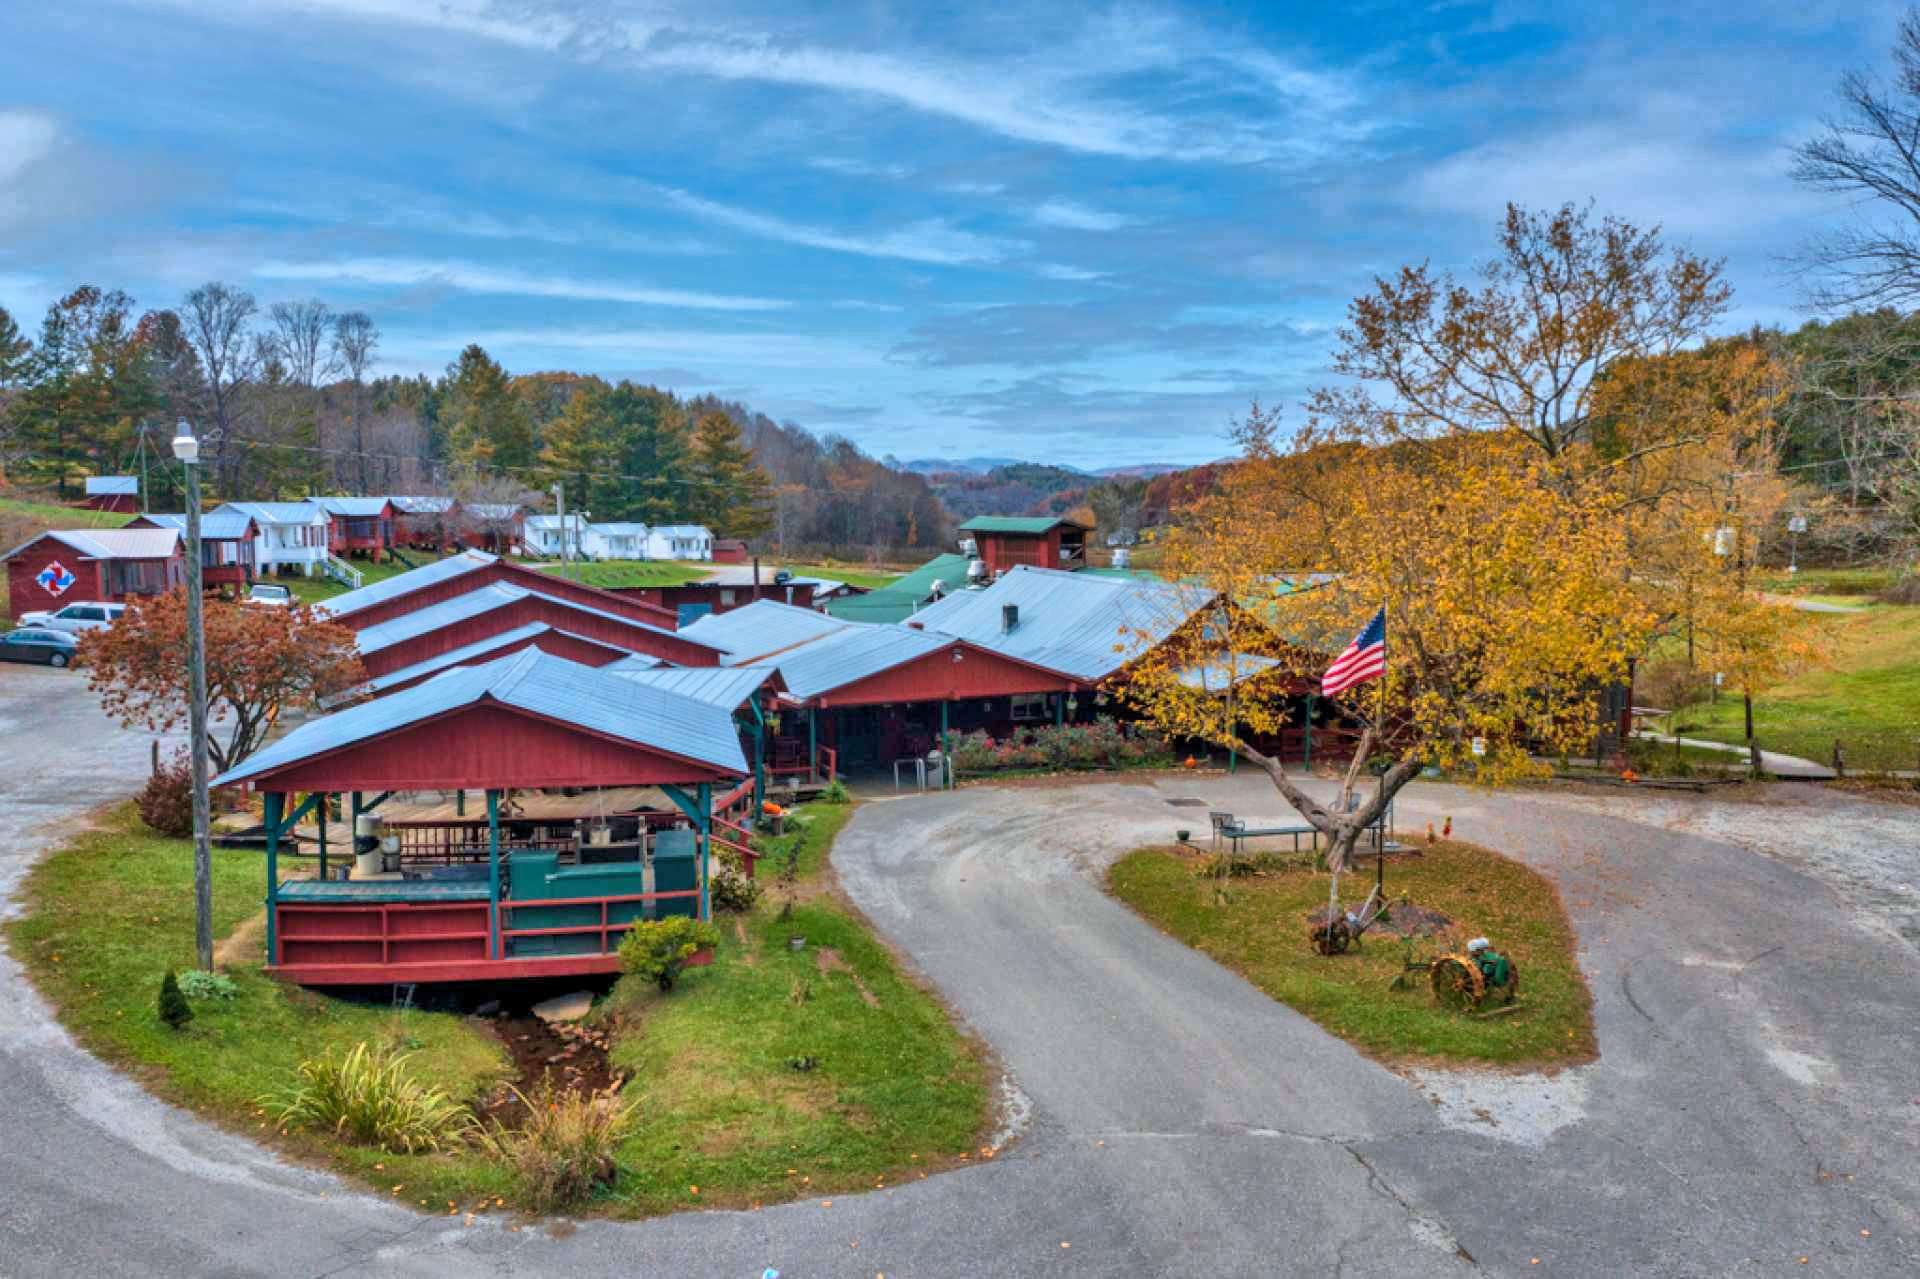 Multiple rental cabins, pond, acreage and restaurant creates an ideal event venue potential.